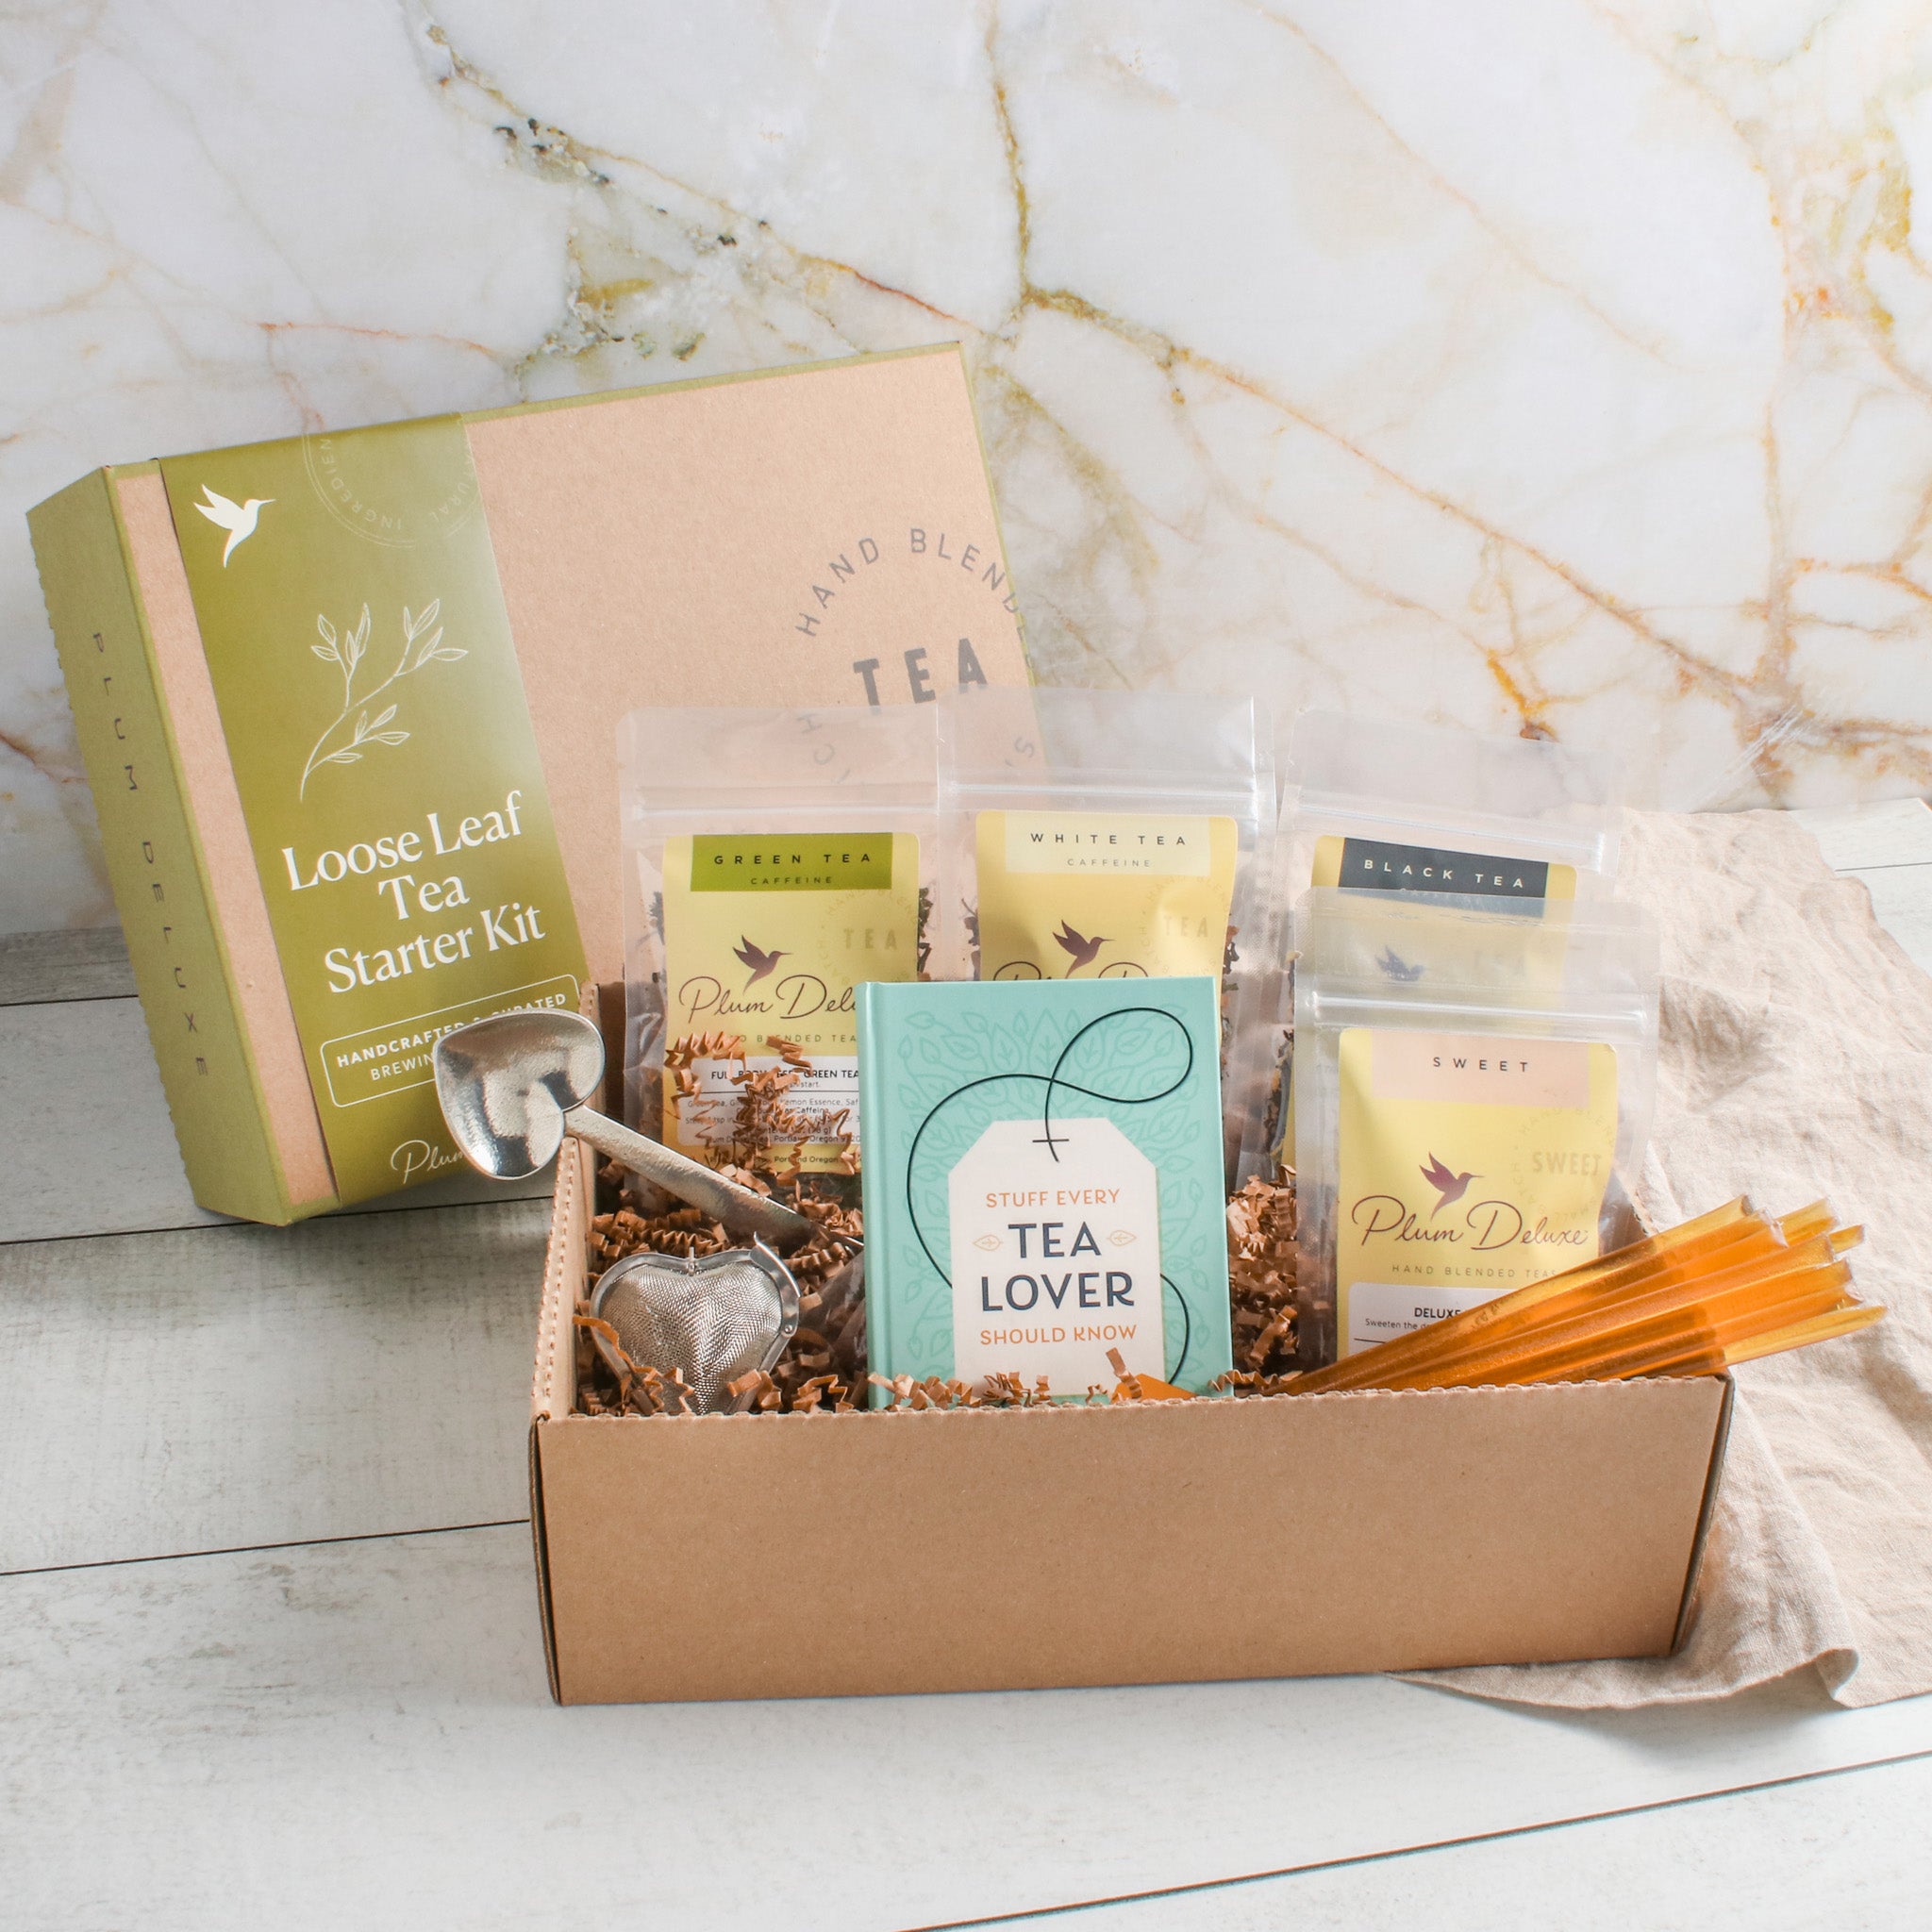 Tea Gifts to Introduce Someone to Tea